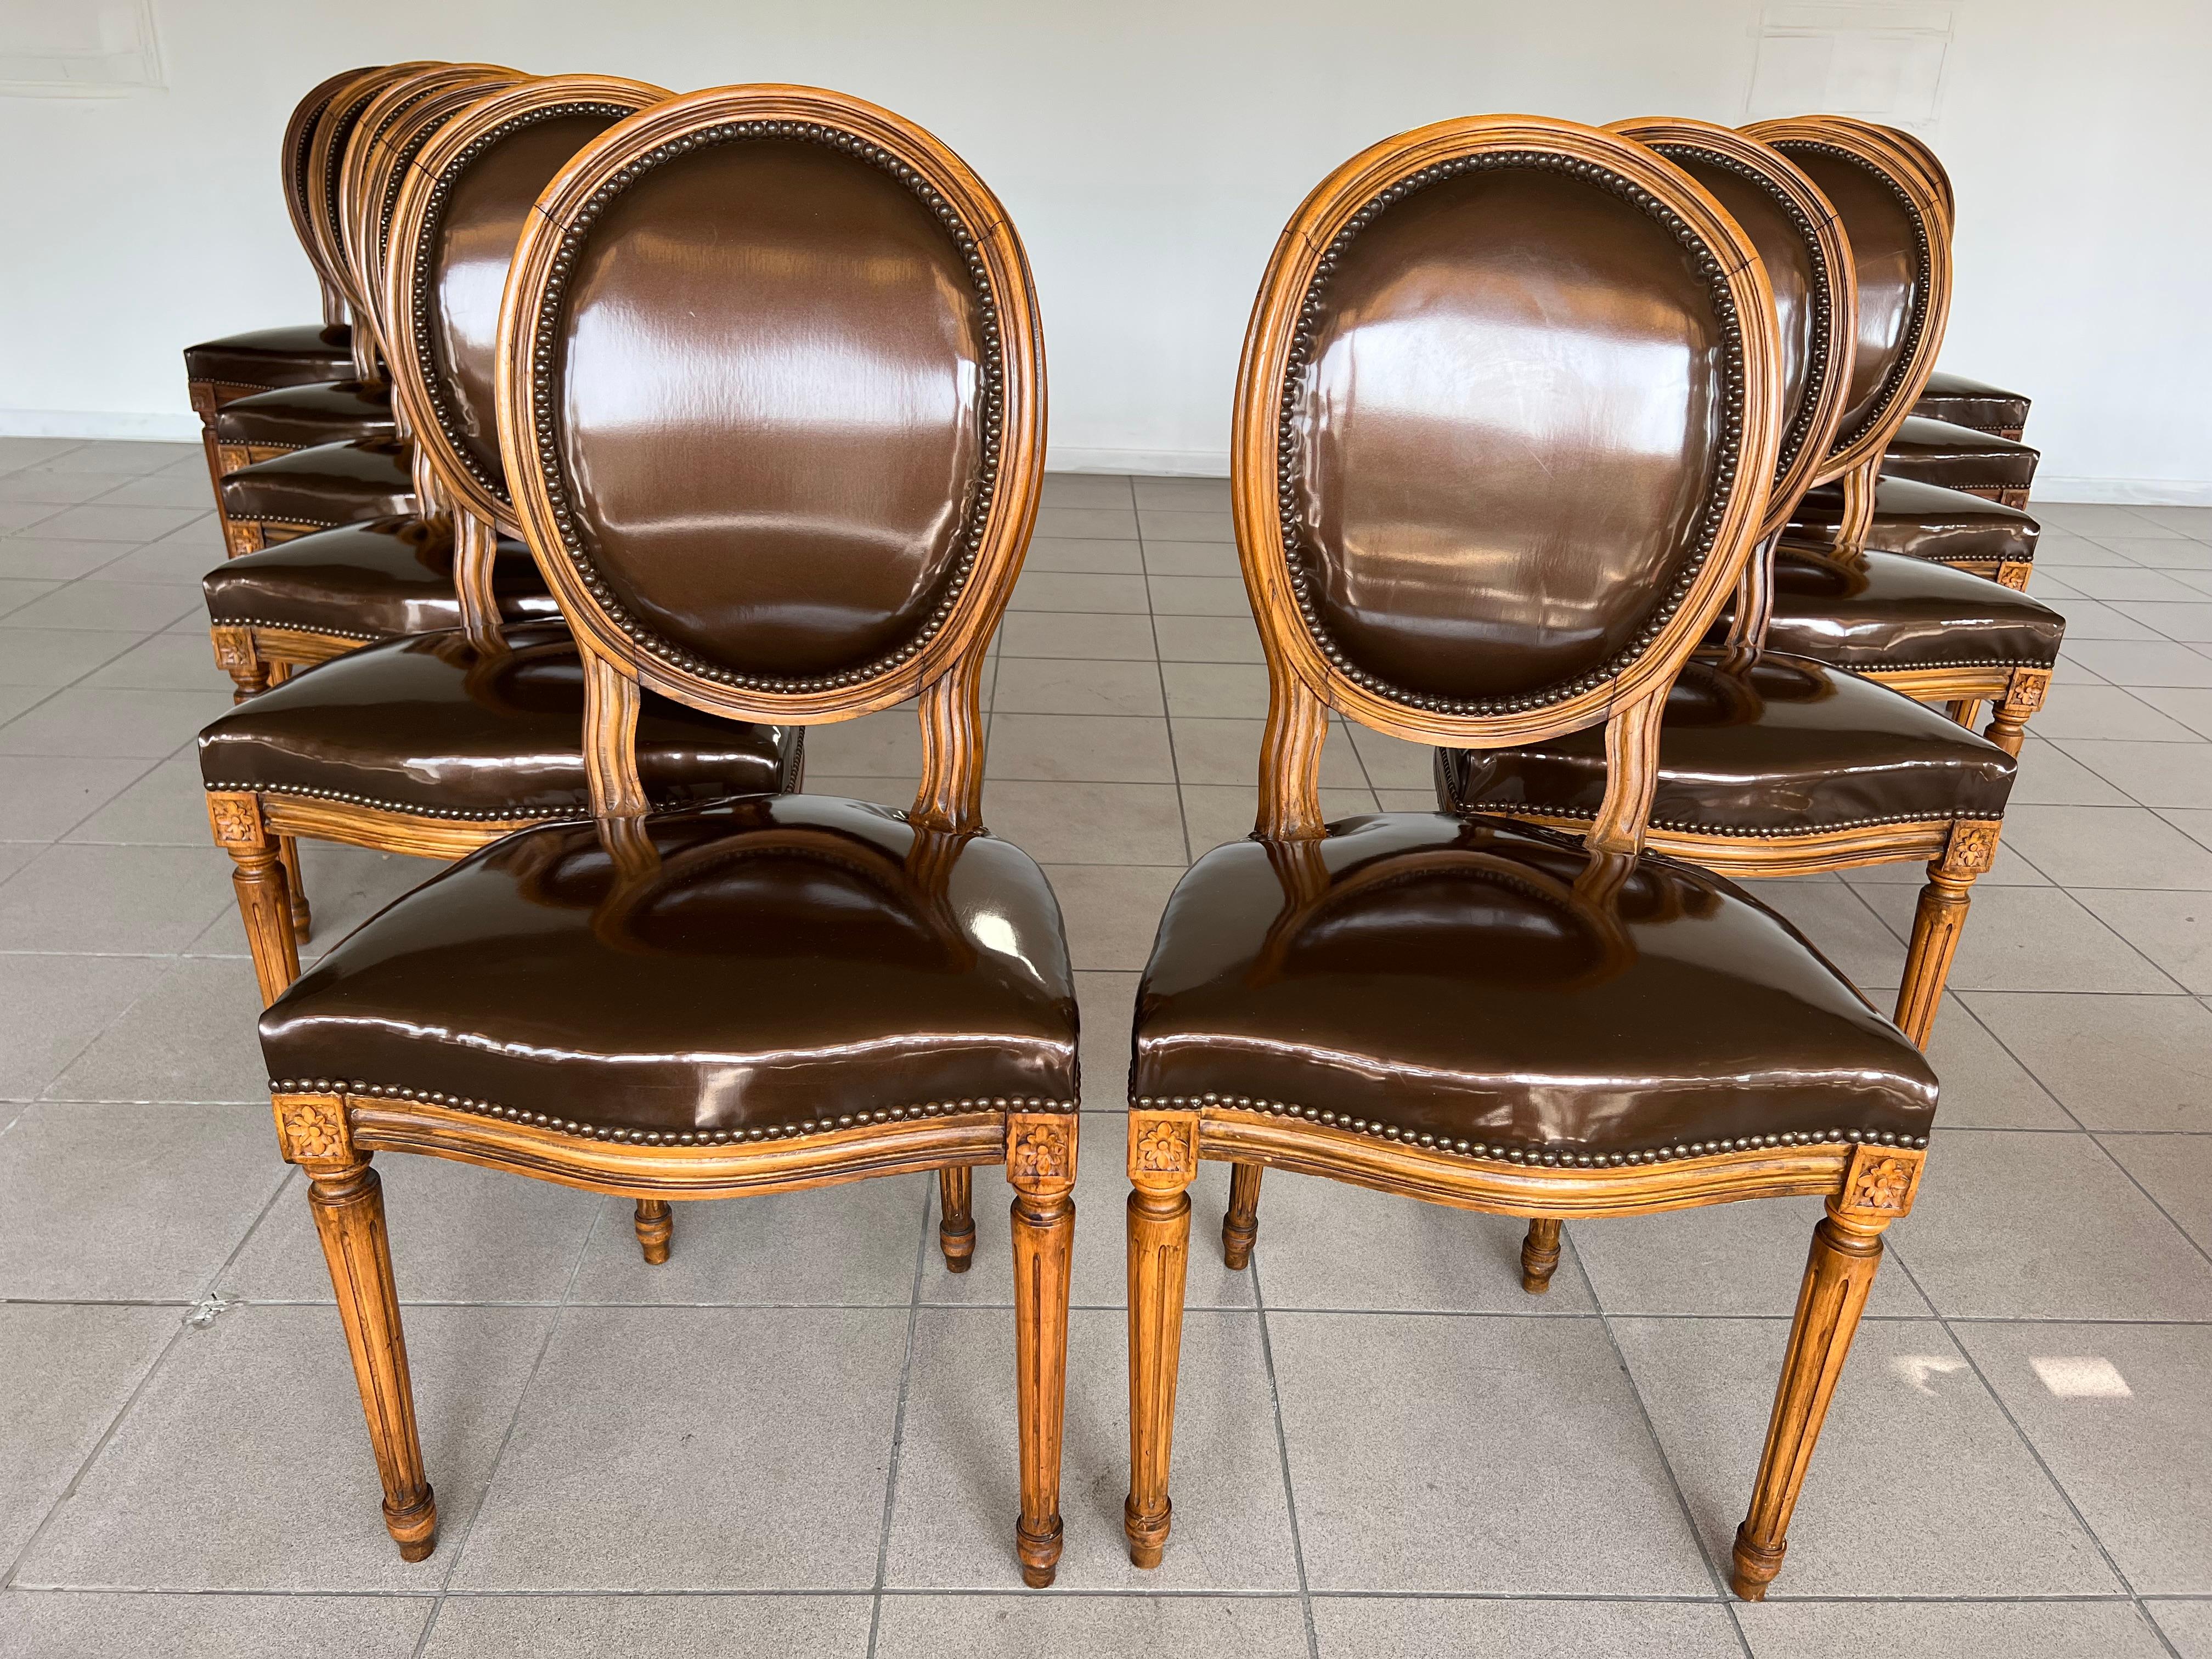 20th Century French Louis XVI Dining Room Chairs, Faux Leather Upholstery - Set of 12